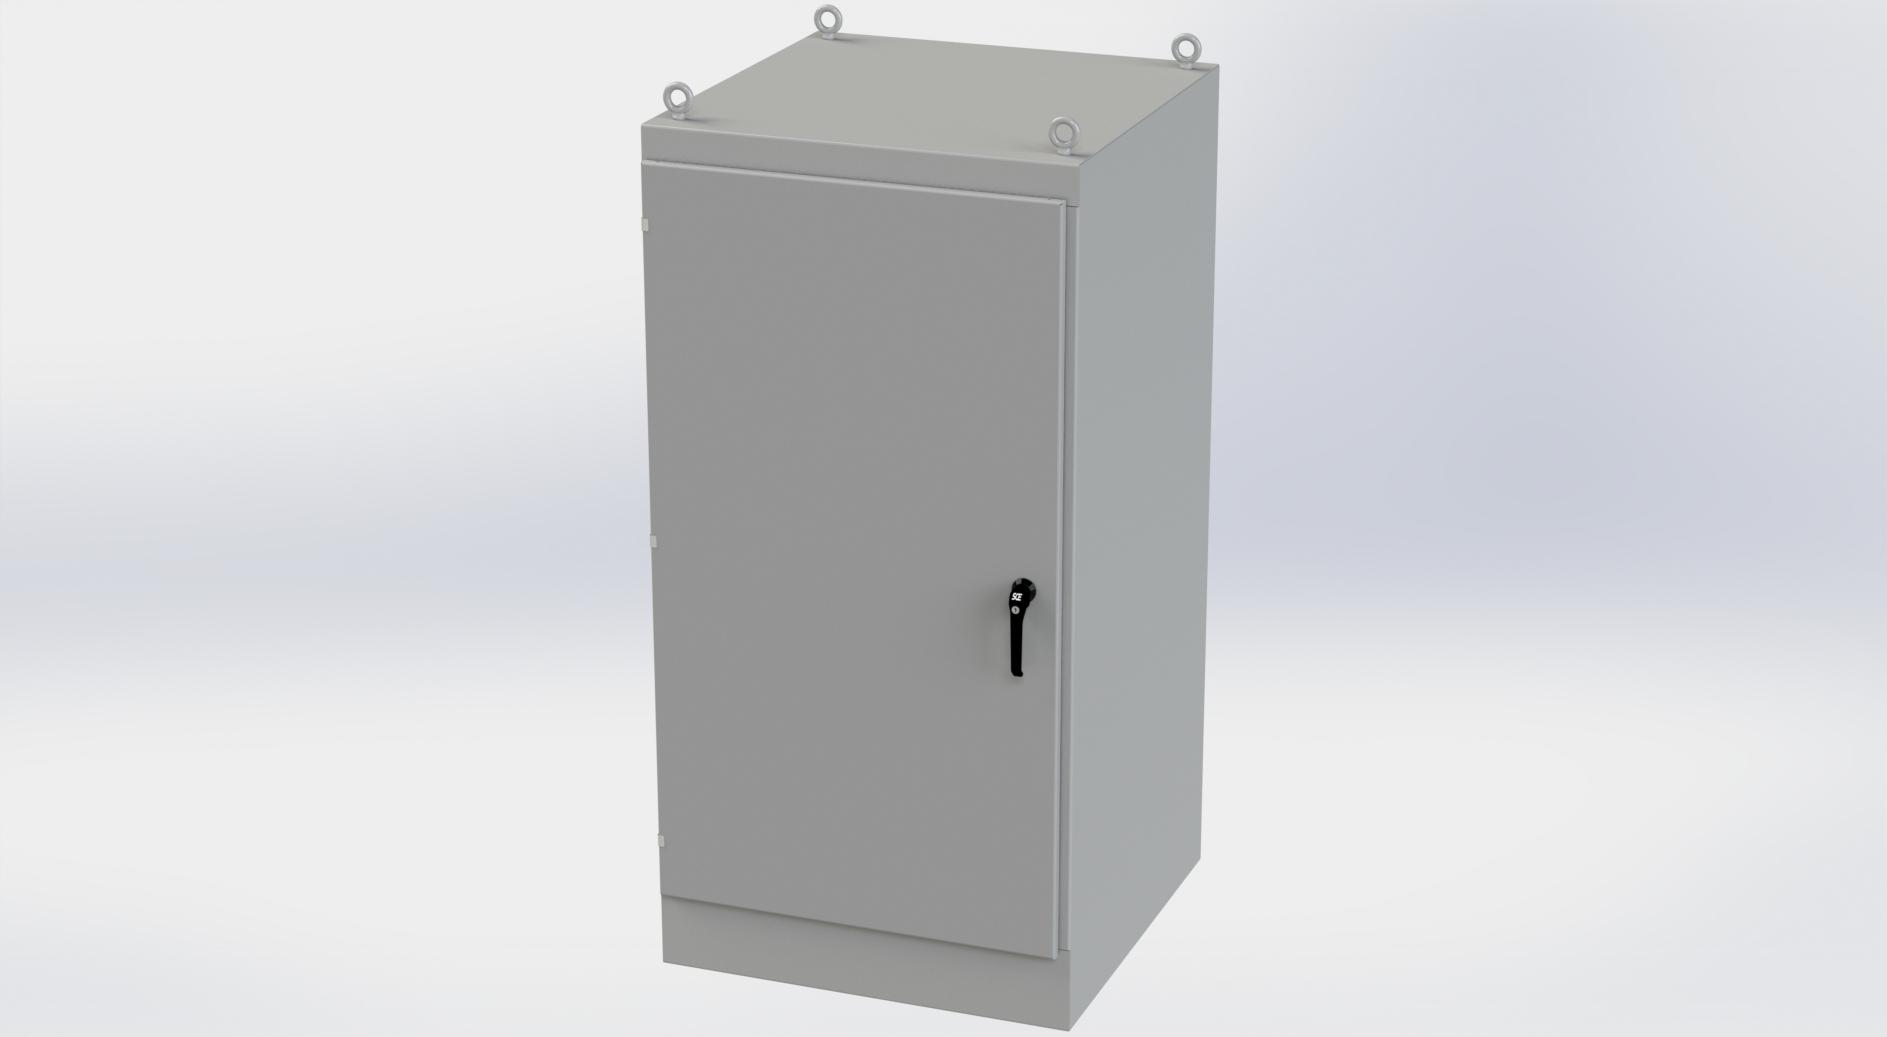 Saginaw Control SCE-723636FS FS Enclosure, Height:72.00", Width:36.00", Depth:36.00", ANSI-61 gray powder coat inside and out. Optional sub-panels are powder coated white.